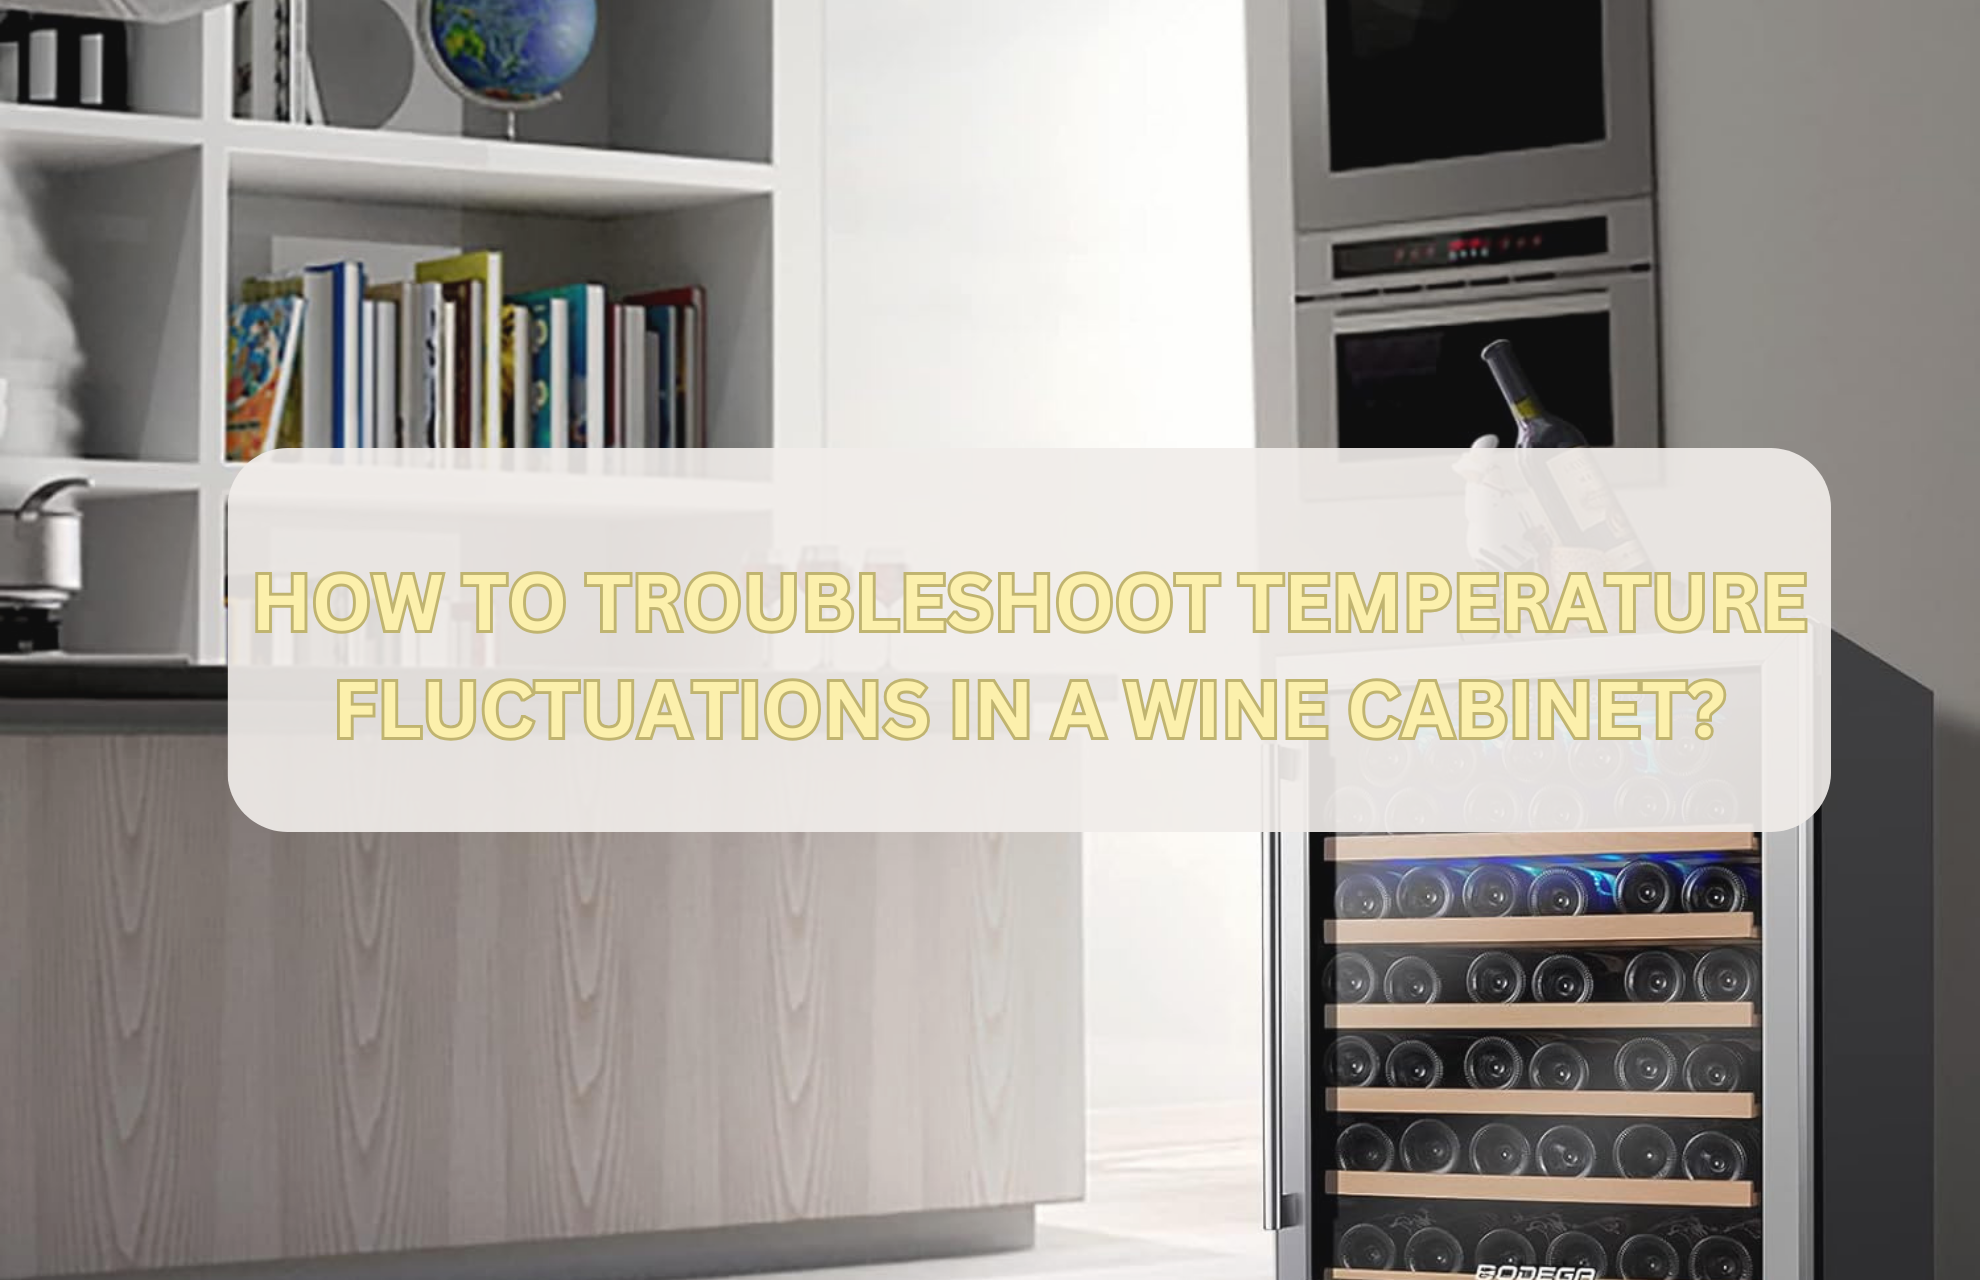 HOW TO TROUBLESHOOT TEMPERATURE FLUCTUATIONS IN A WINE CABINET